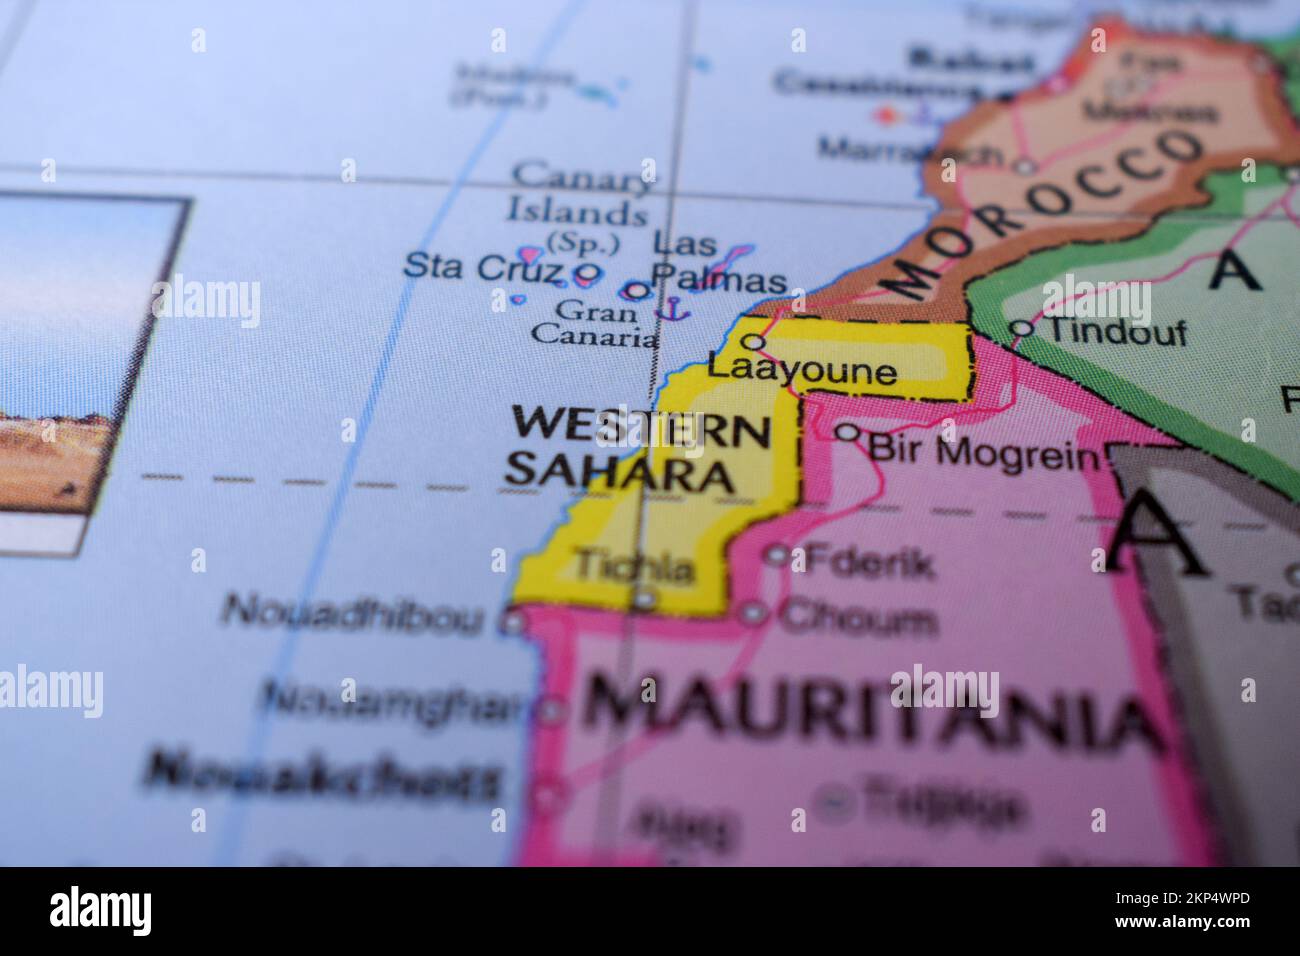 Western Sahara Travel Concept Country Name On The Political World Map Very Macro Close-Up View Stock Photo